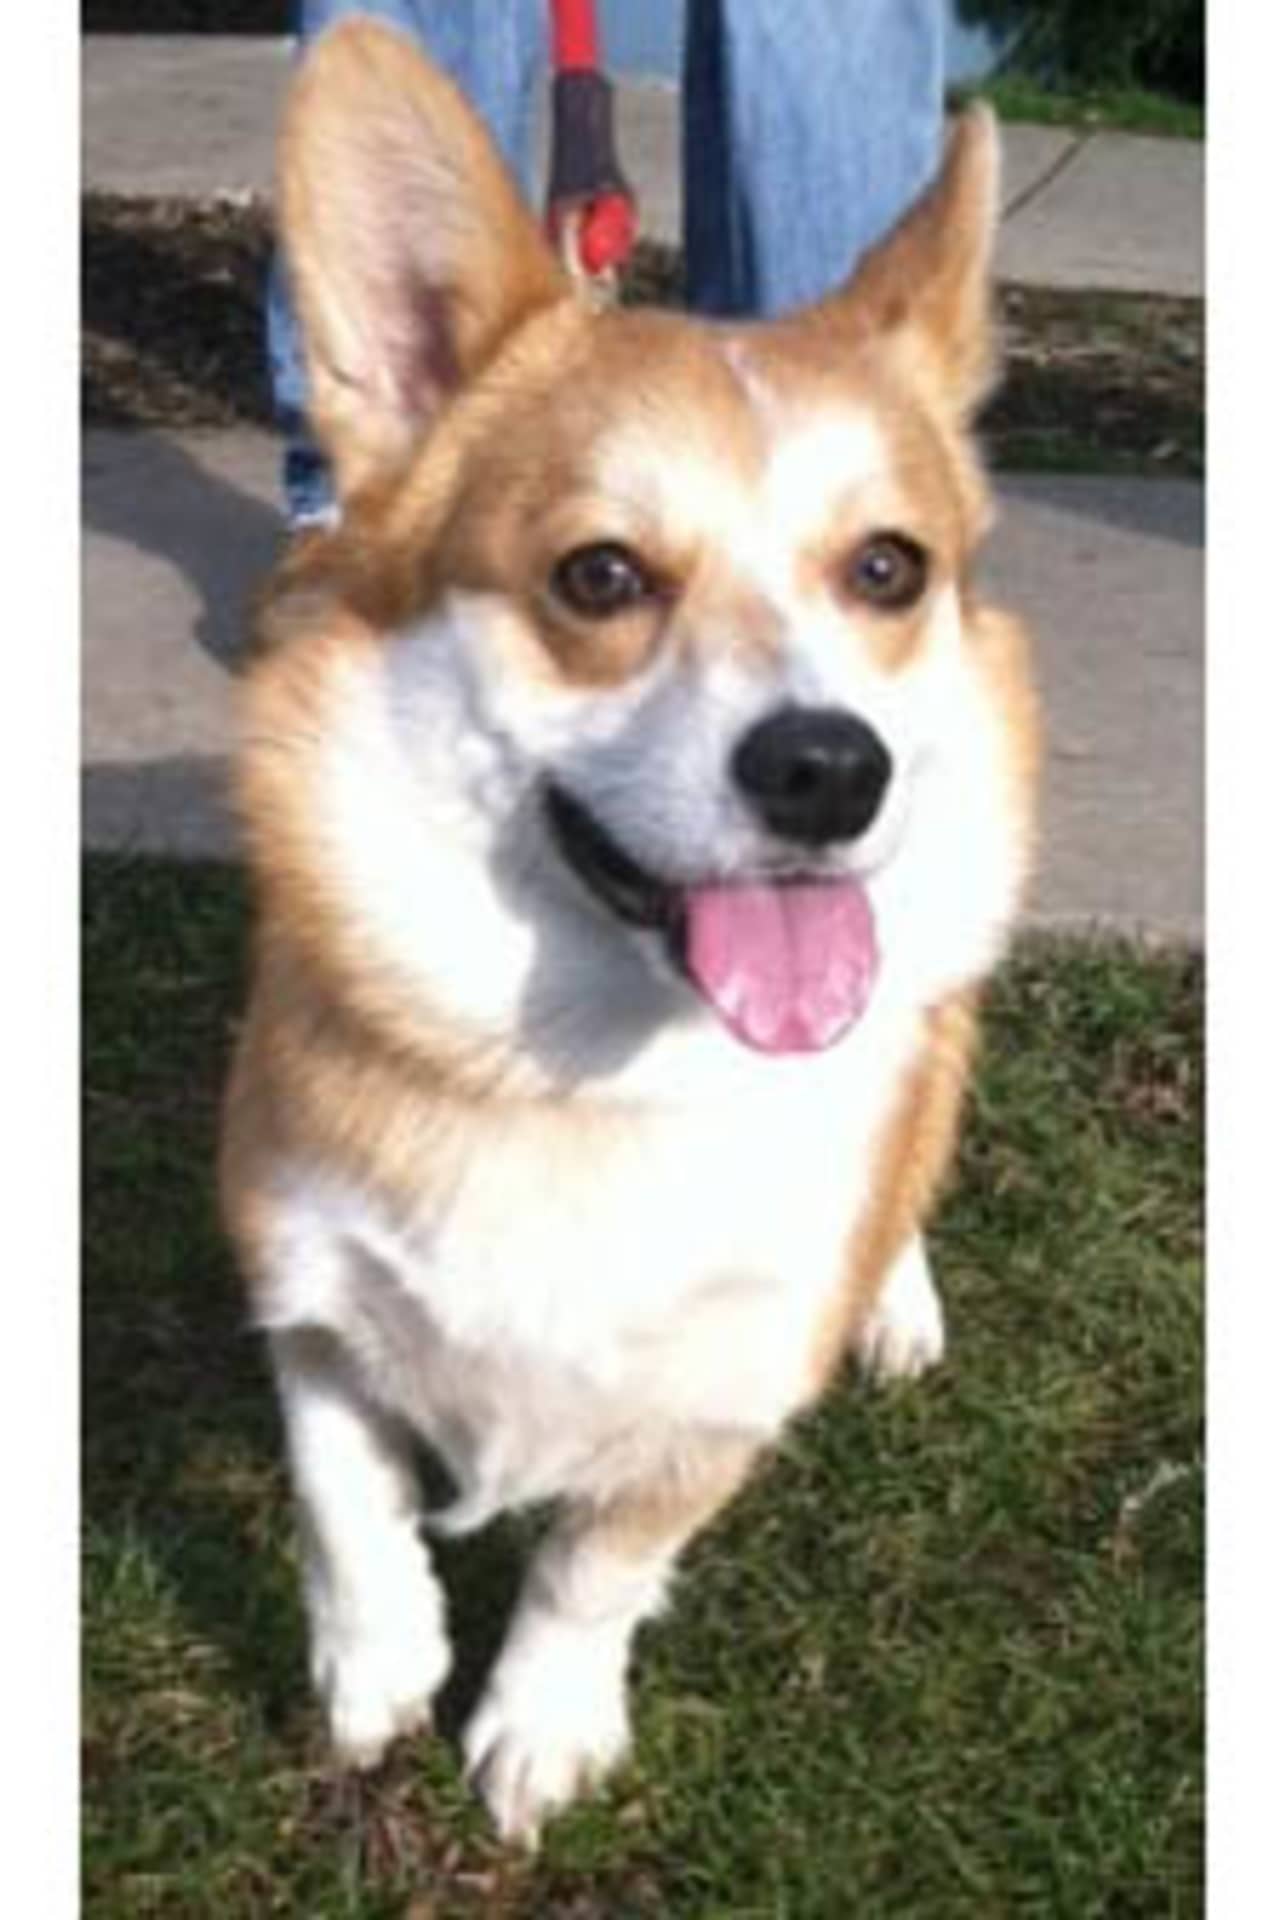 Einstein, a corgi, is one of many adoptable pets available at the SPCA of Westchester in Briarcliff Manor.